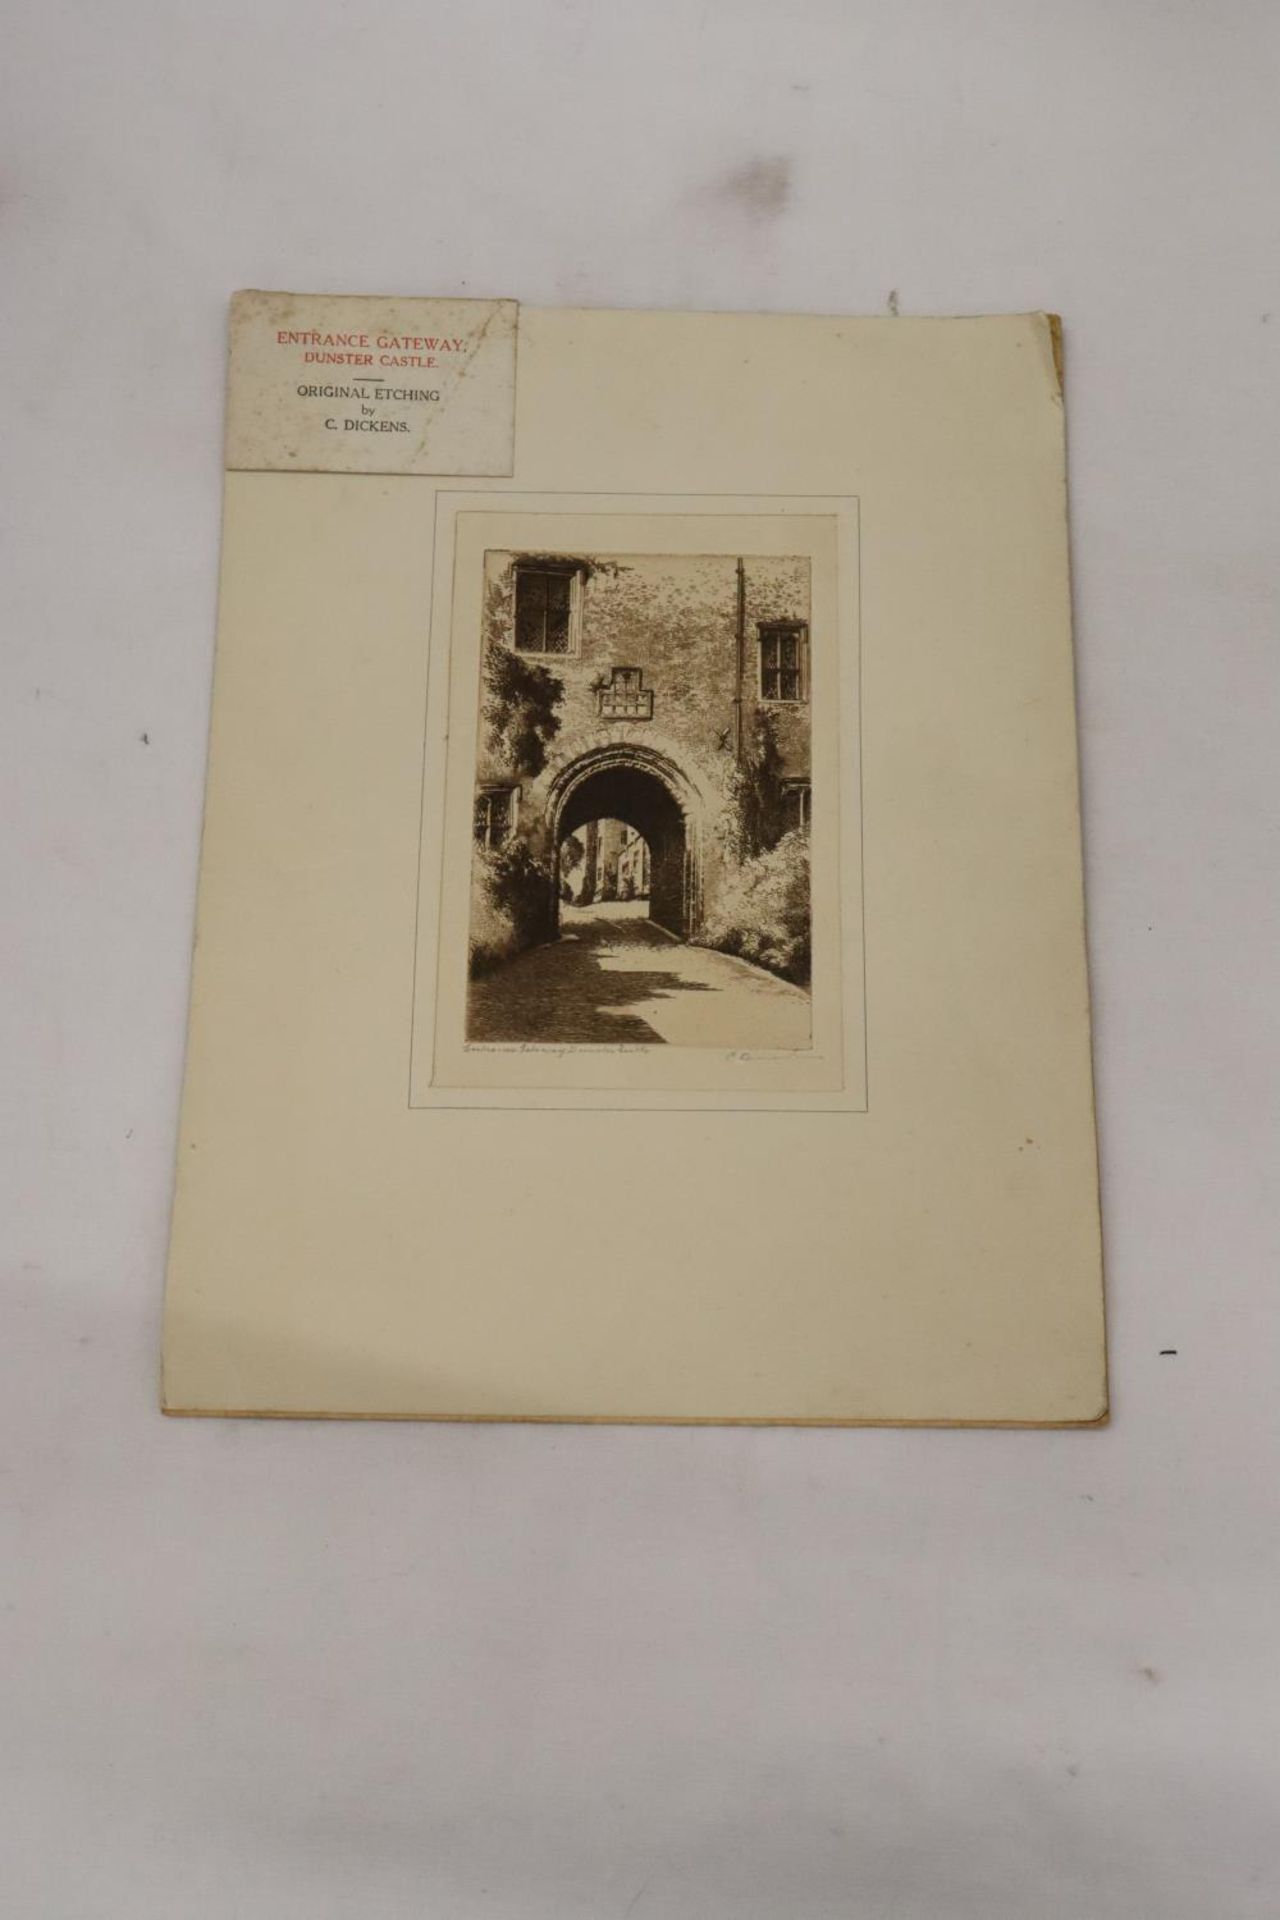 AN ORIGINAL ETCHING OF THE ENTRANCE GATEWAY TO DUNSTER CASTLE, BY C. DICKENS, SIGNED